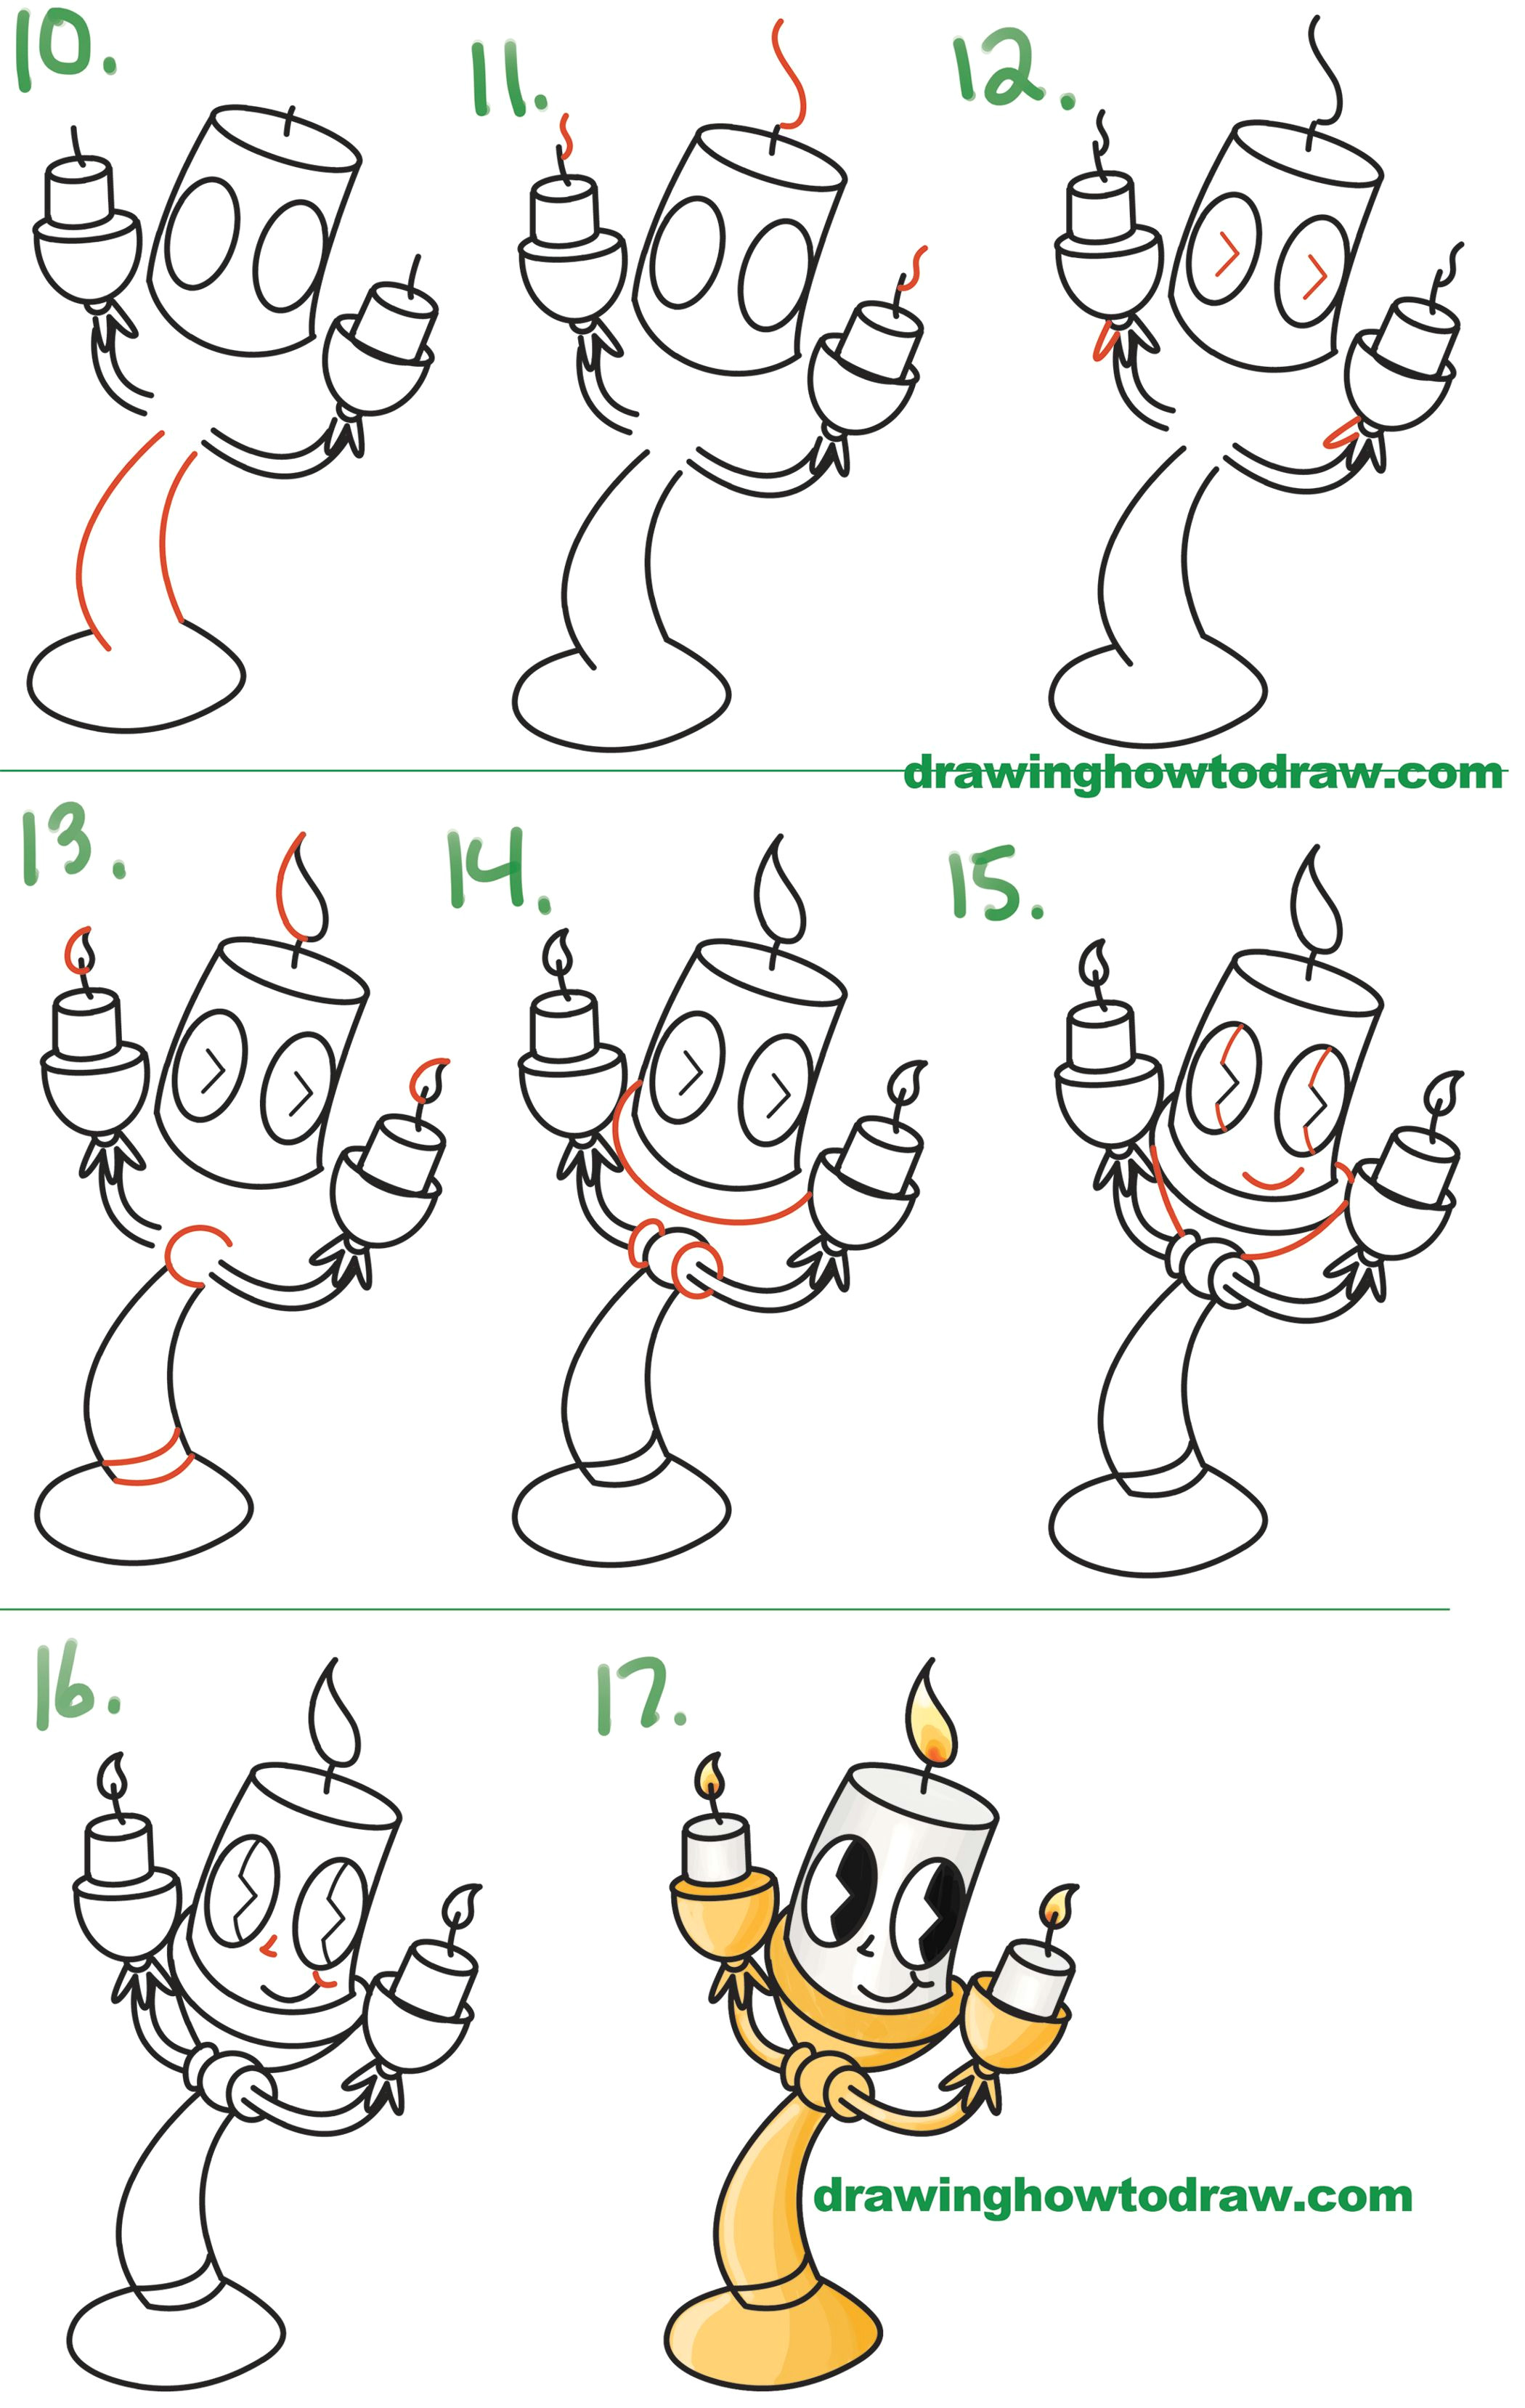 Drawing Cartoons Tutorials for Beginners How to Draw Lumiere Cute Kawaii Chibi From Beauty and the Beast